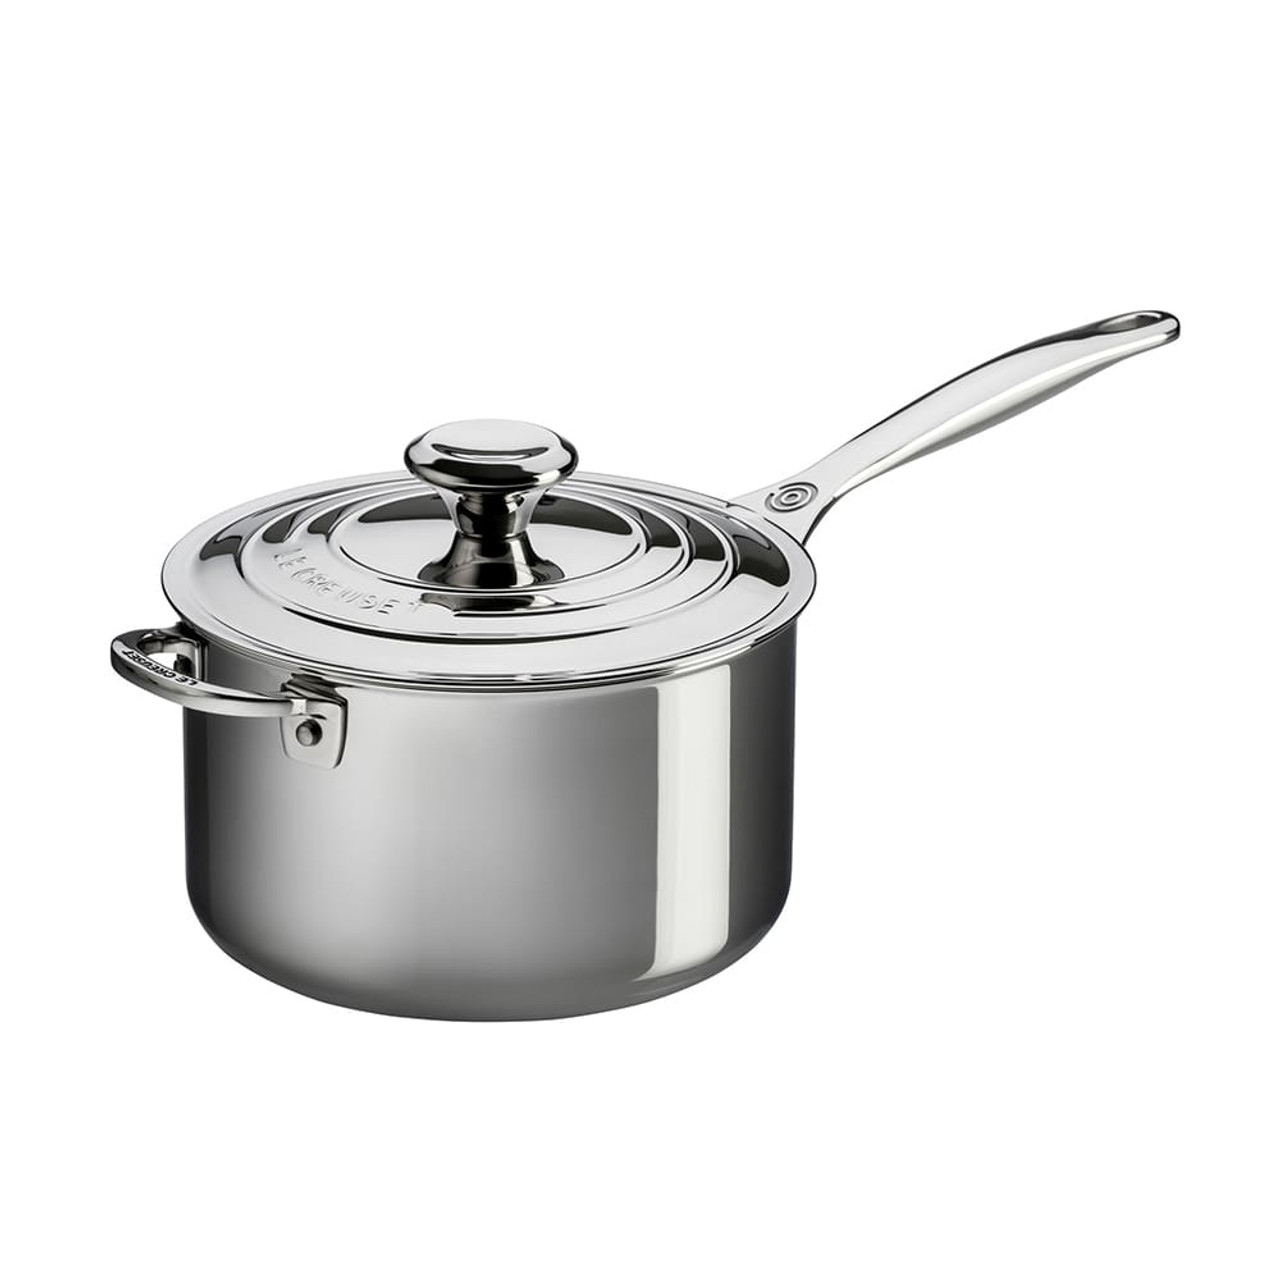 Le Creuset Tri-Ply Stainless Steel 12 Fry Pan